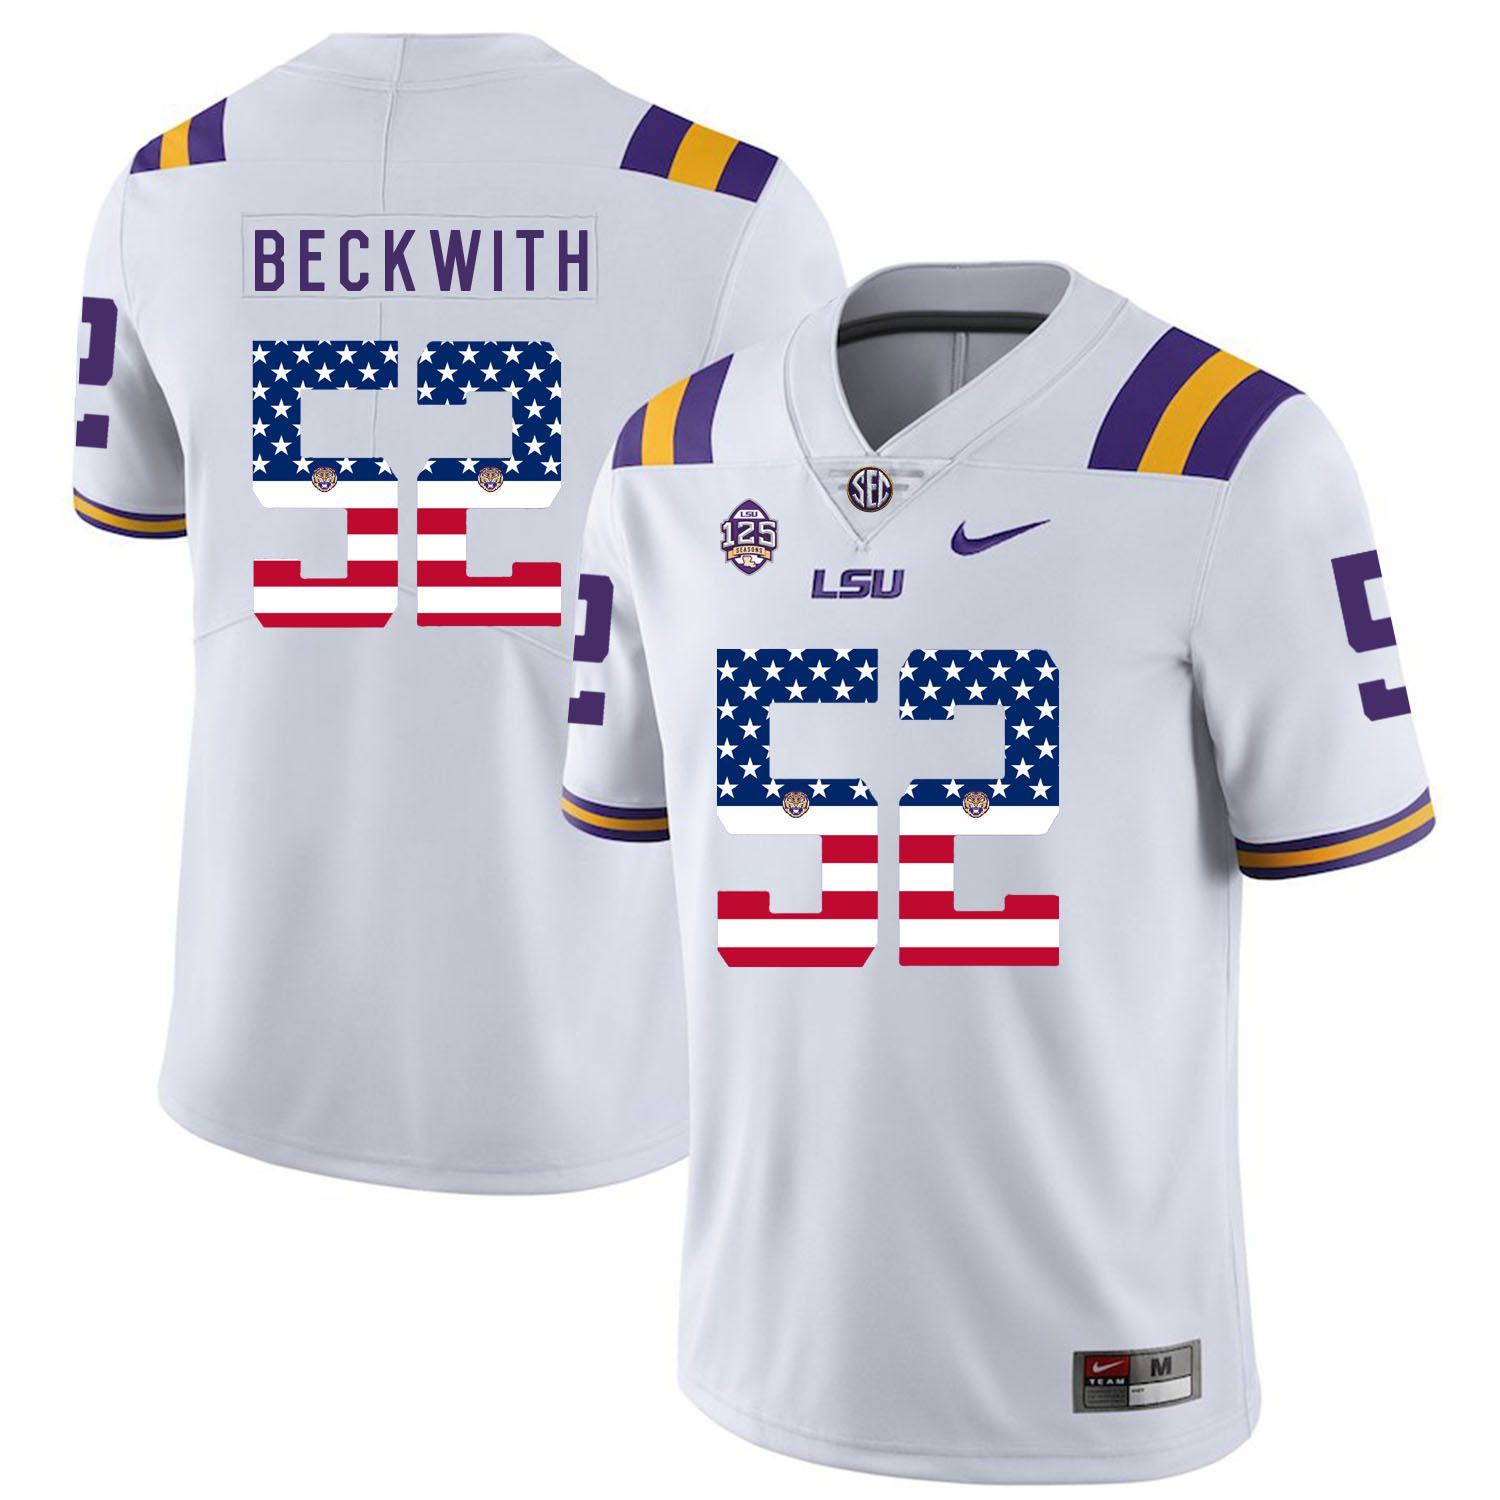 Men LSU Tigers #52 Beckwith White Flag Customized NCAA Jerseys